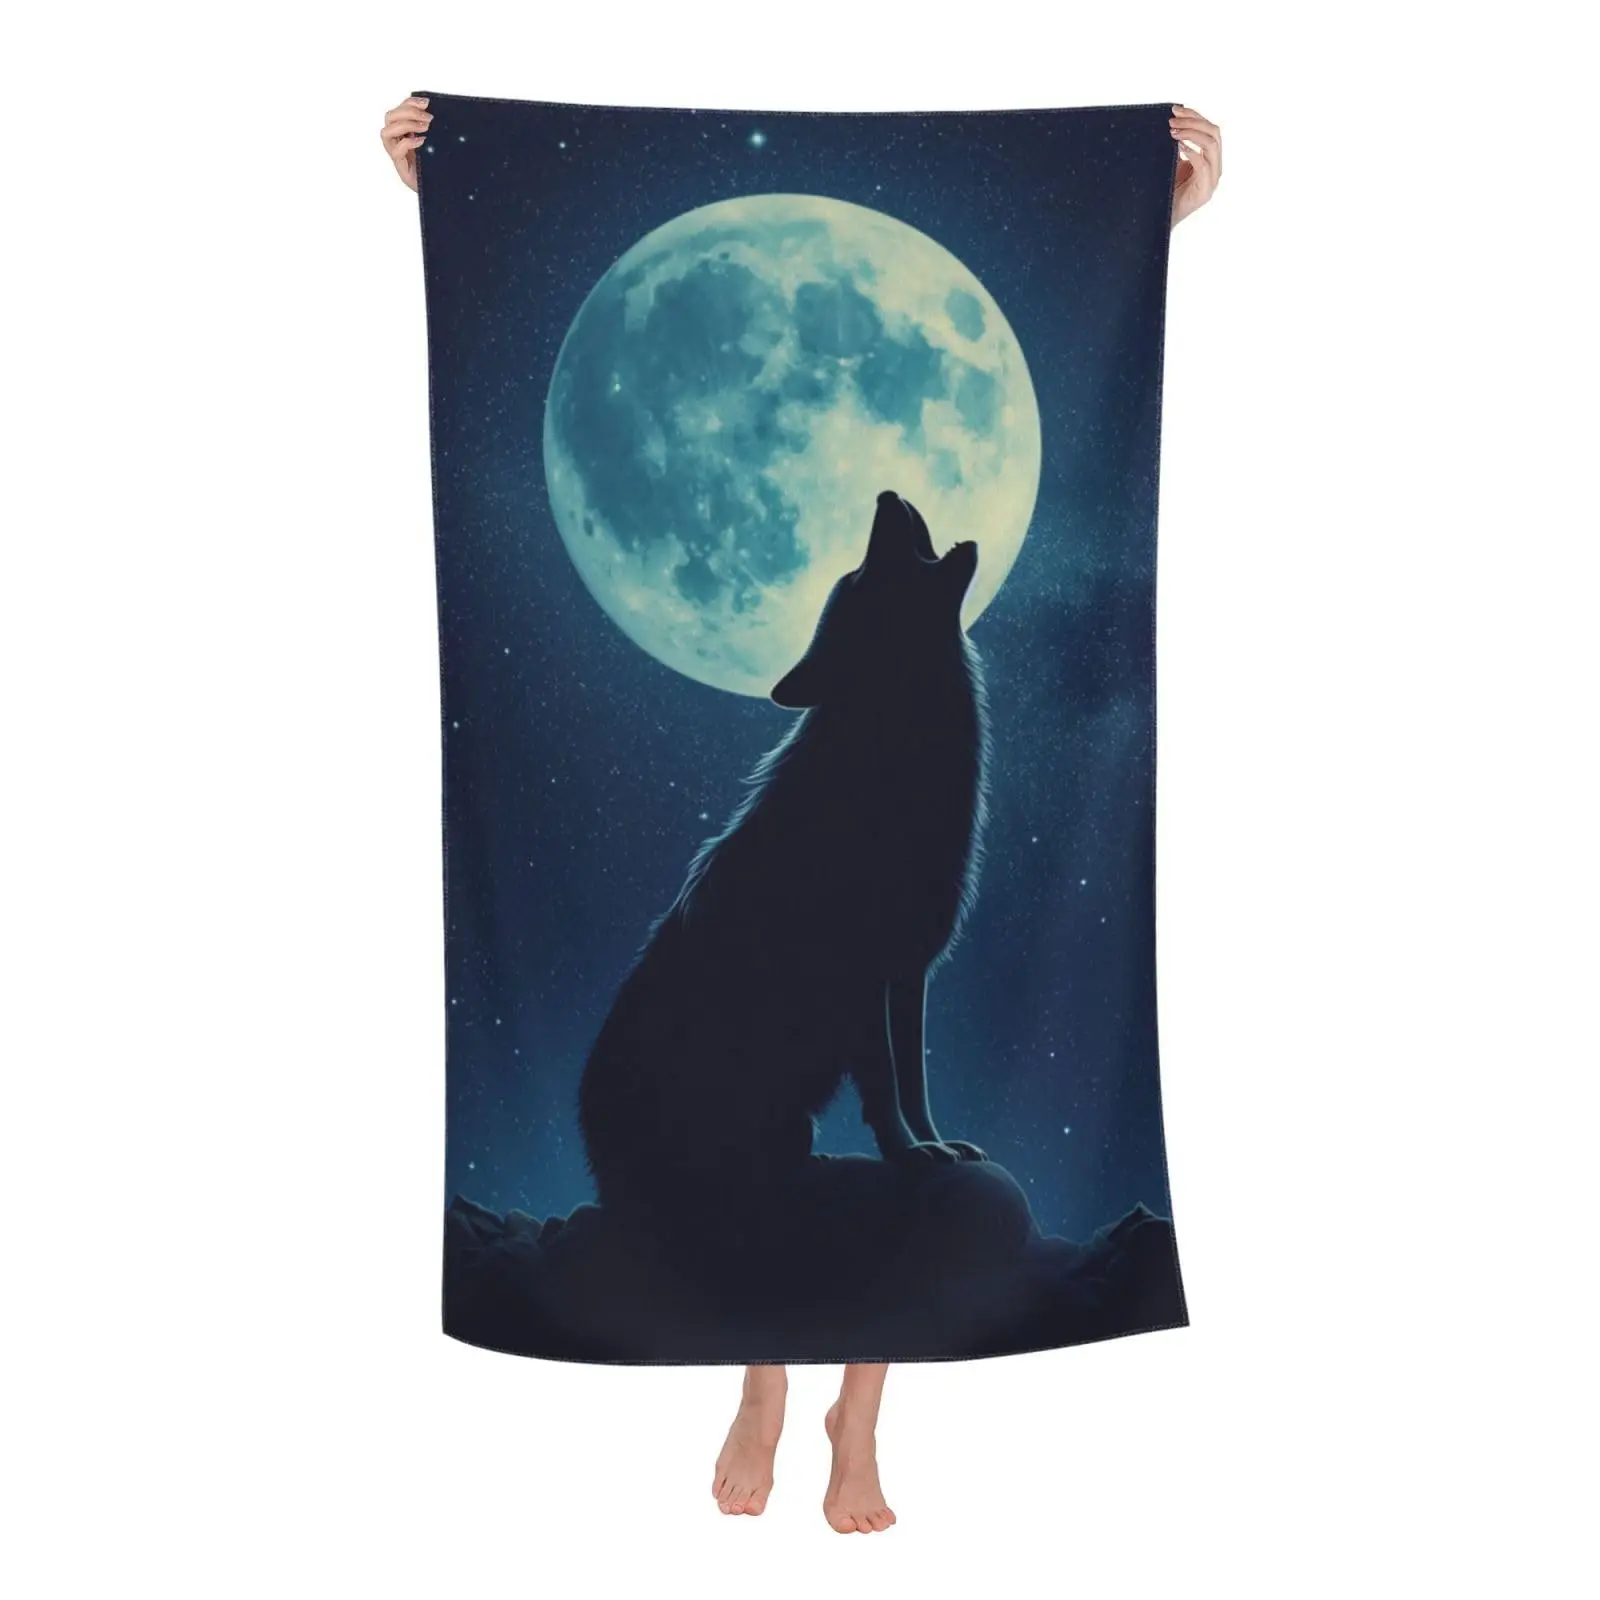 

Wolf Theme Beach Towel Sand-Free Microfiber Soft Towels Quick Dry Pool Towel Absorbent Lightweight Towel for Kids Adult